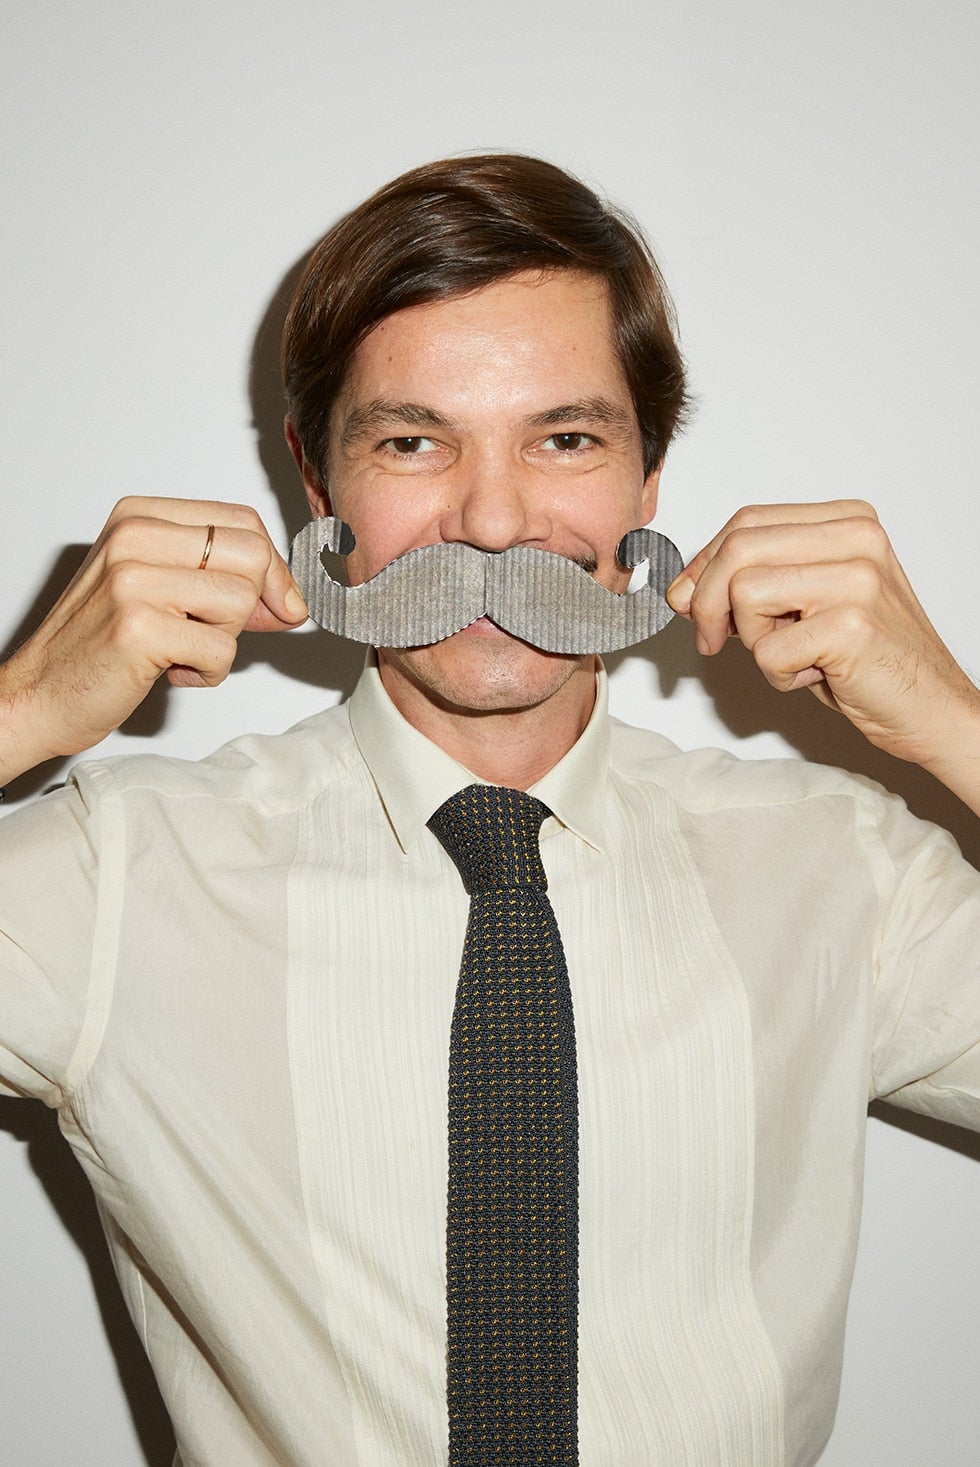 Meet the Dapper, Mustachioed Parisian Who’s Tops in Crafting Enticing Jewels